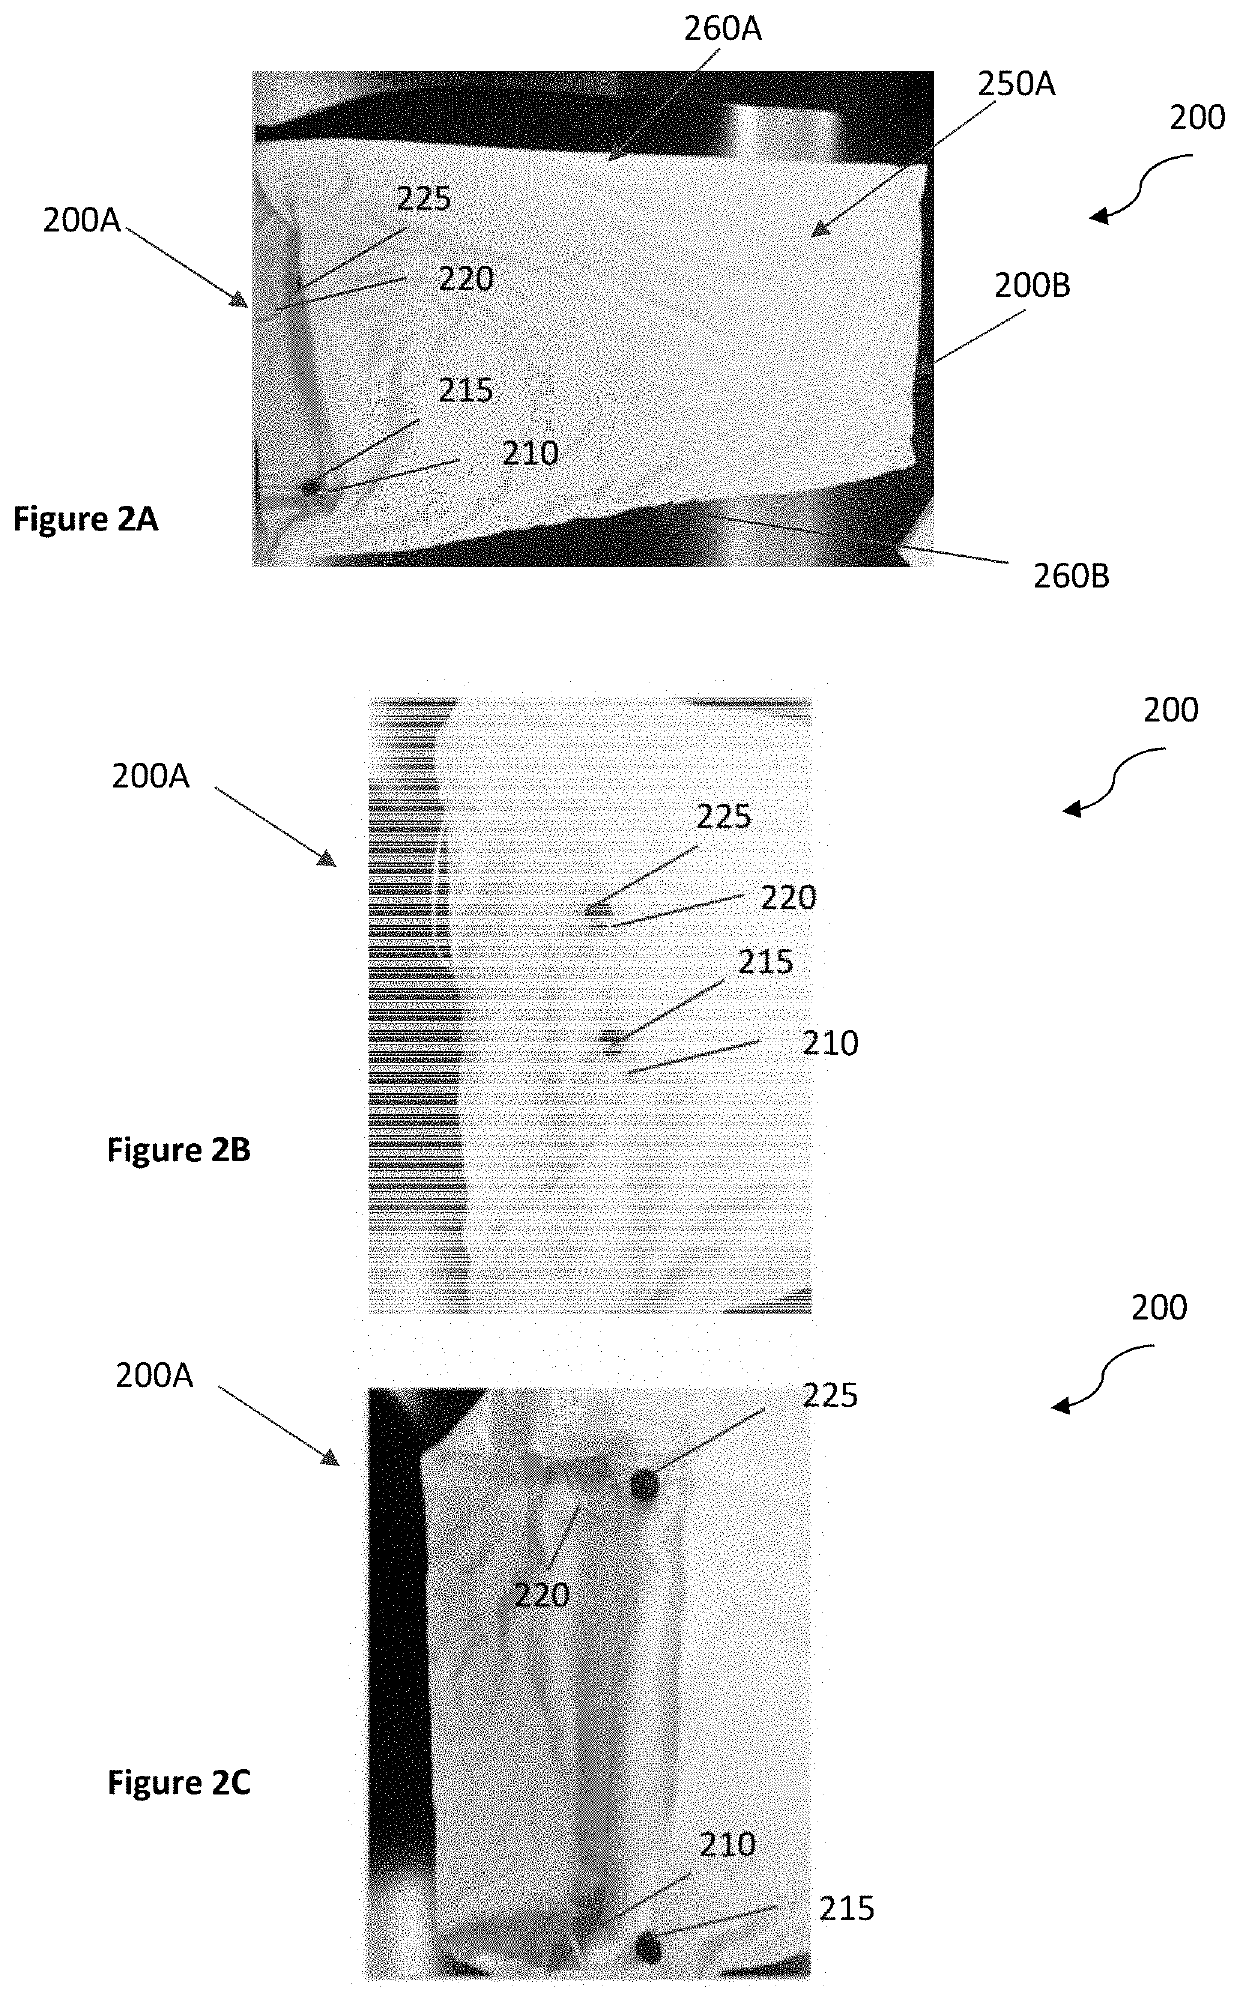 Adjustable Pillows and Methods of Manufacturing Same